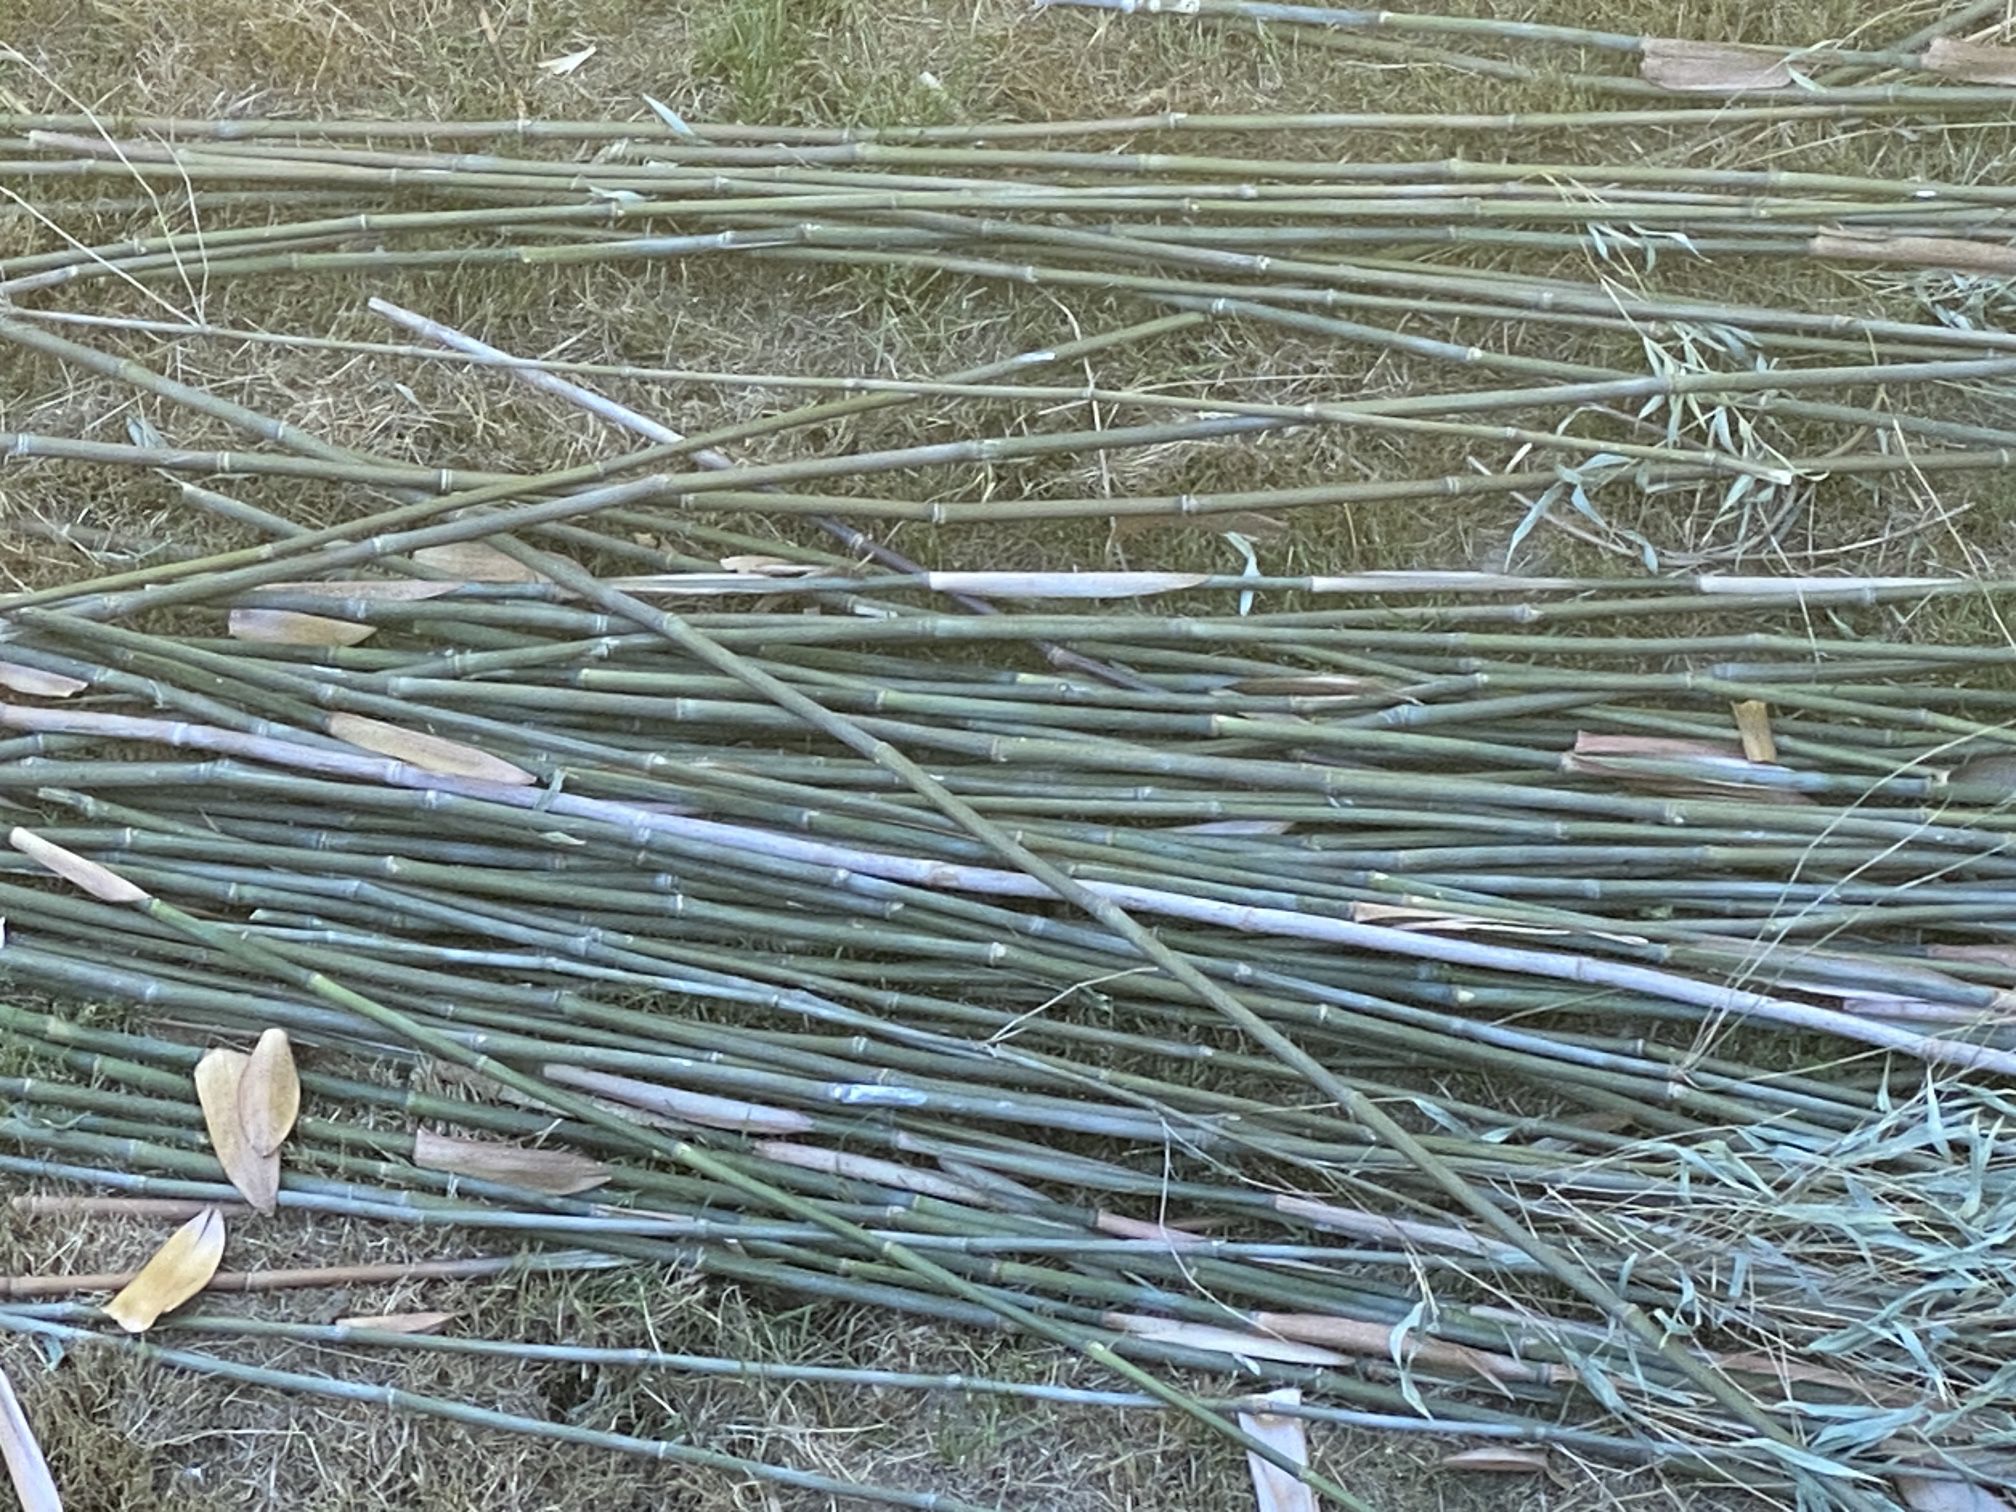 Bamboo stakes for plants and gardens